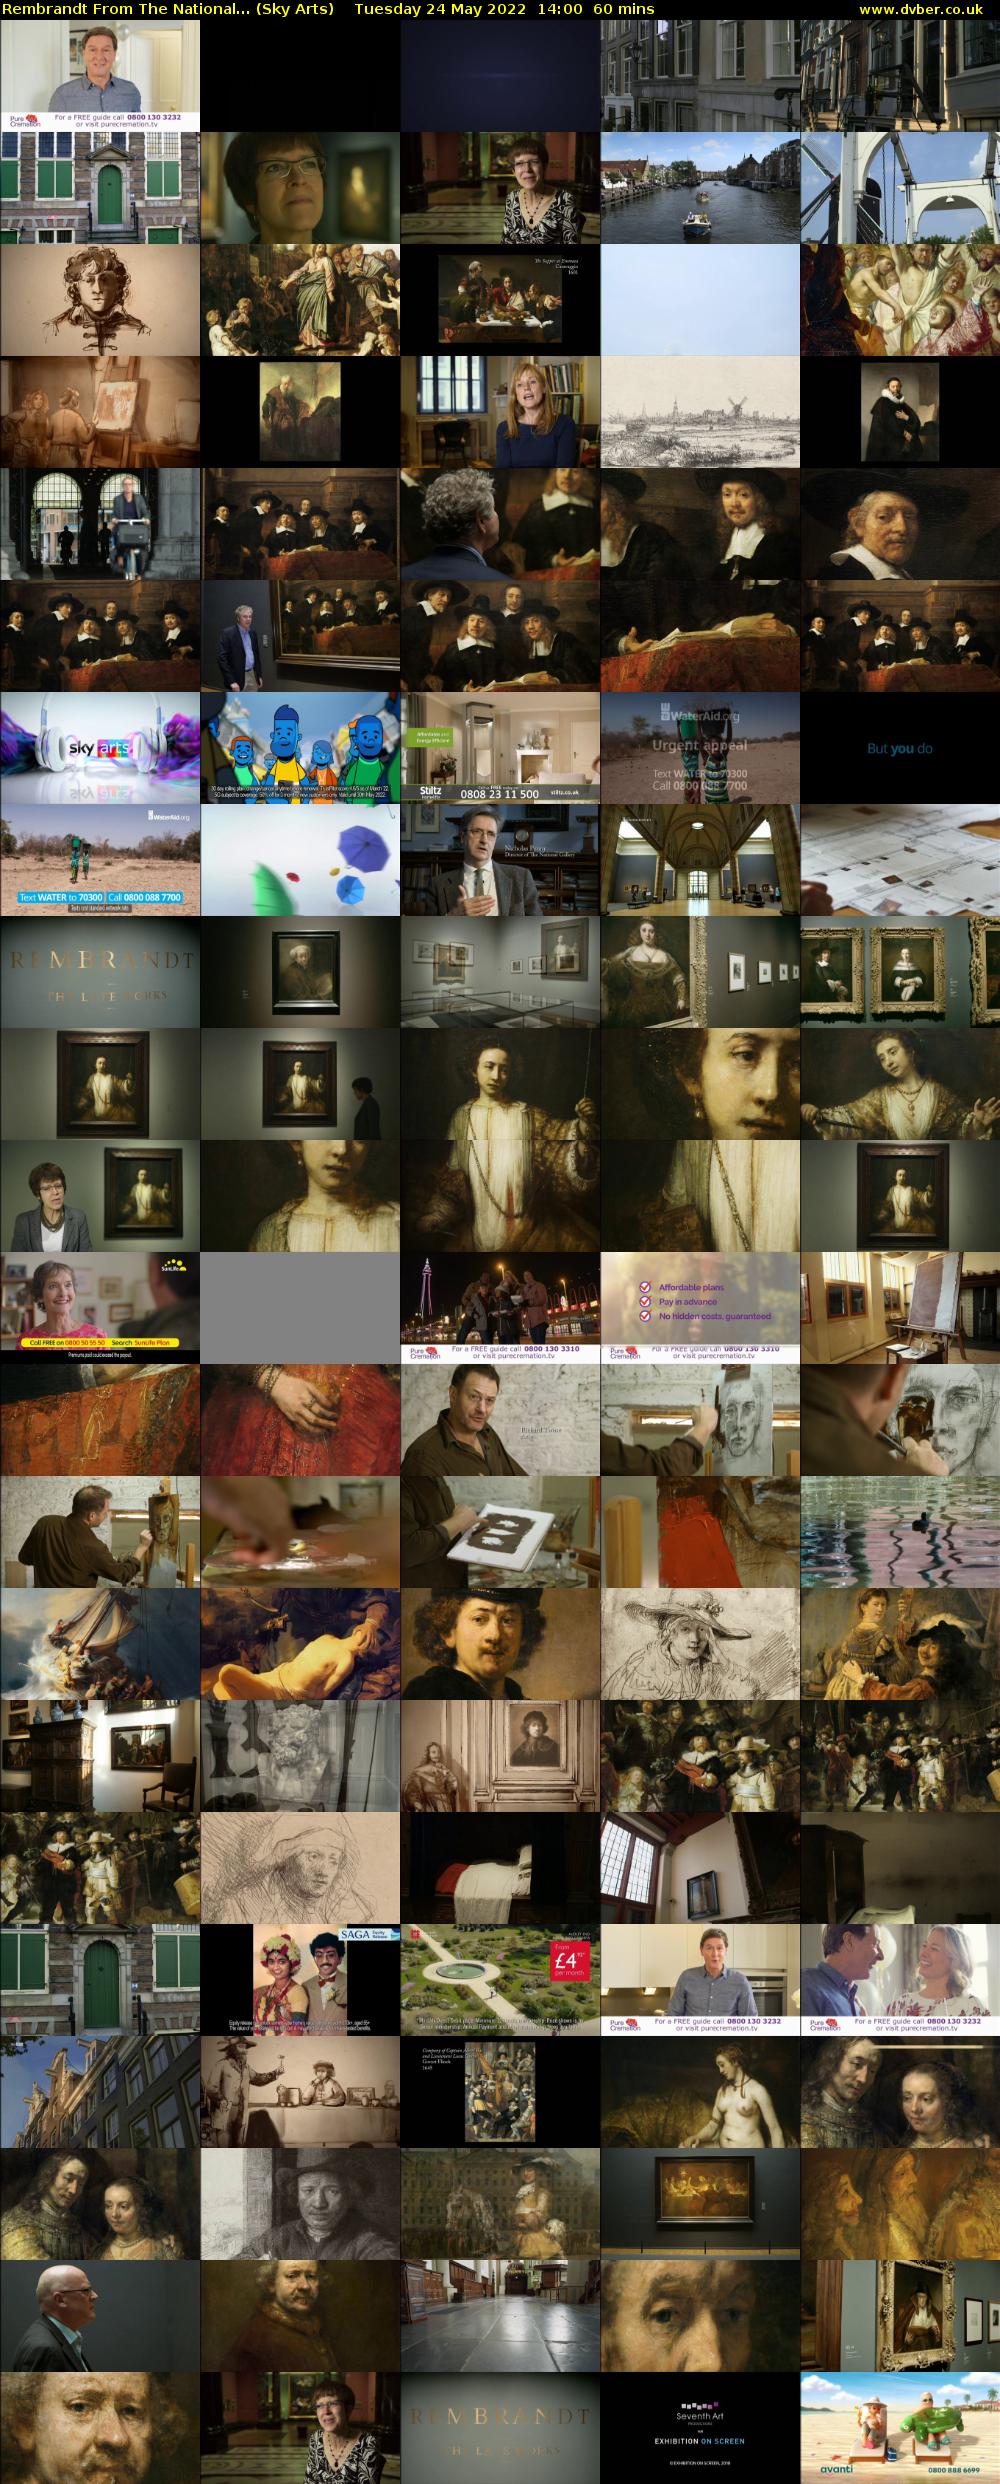 Rembrandt From The National... (Sky Arts) Tuesday 24 May 2022 14:00 - 15:00